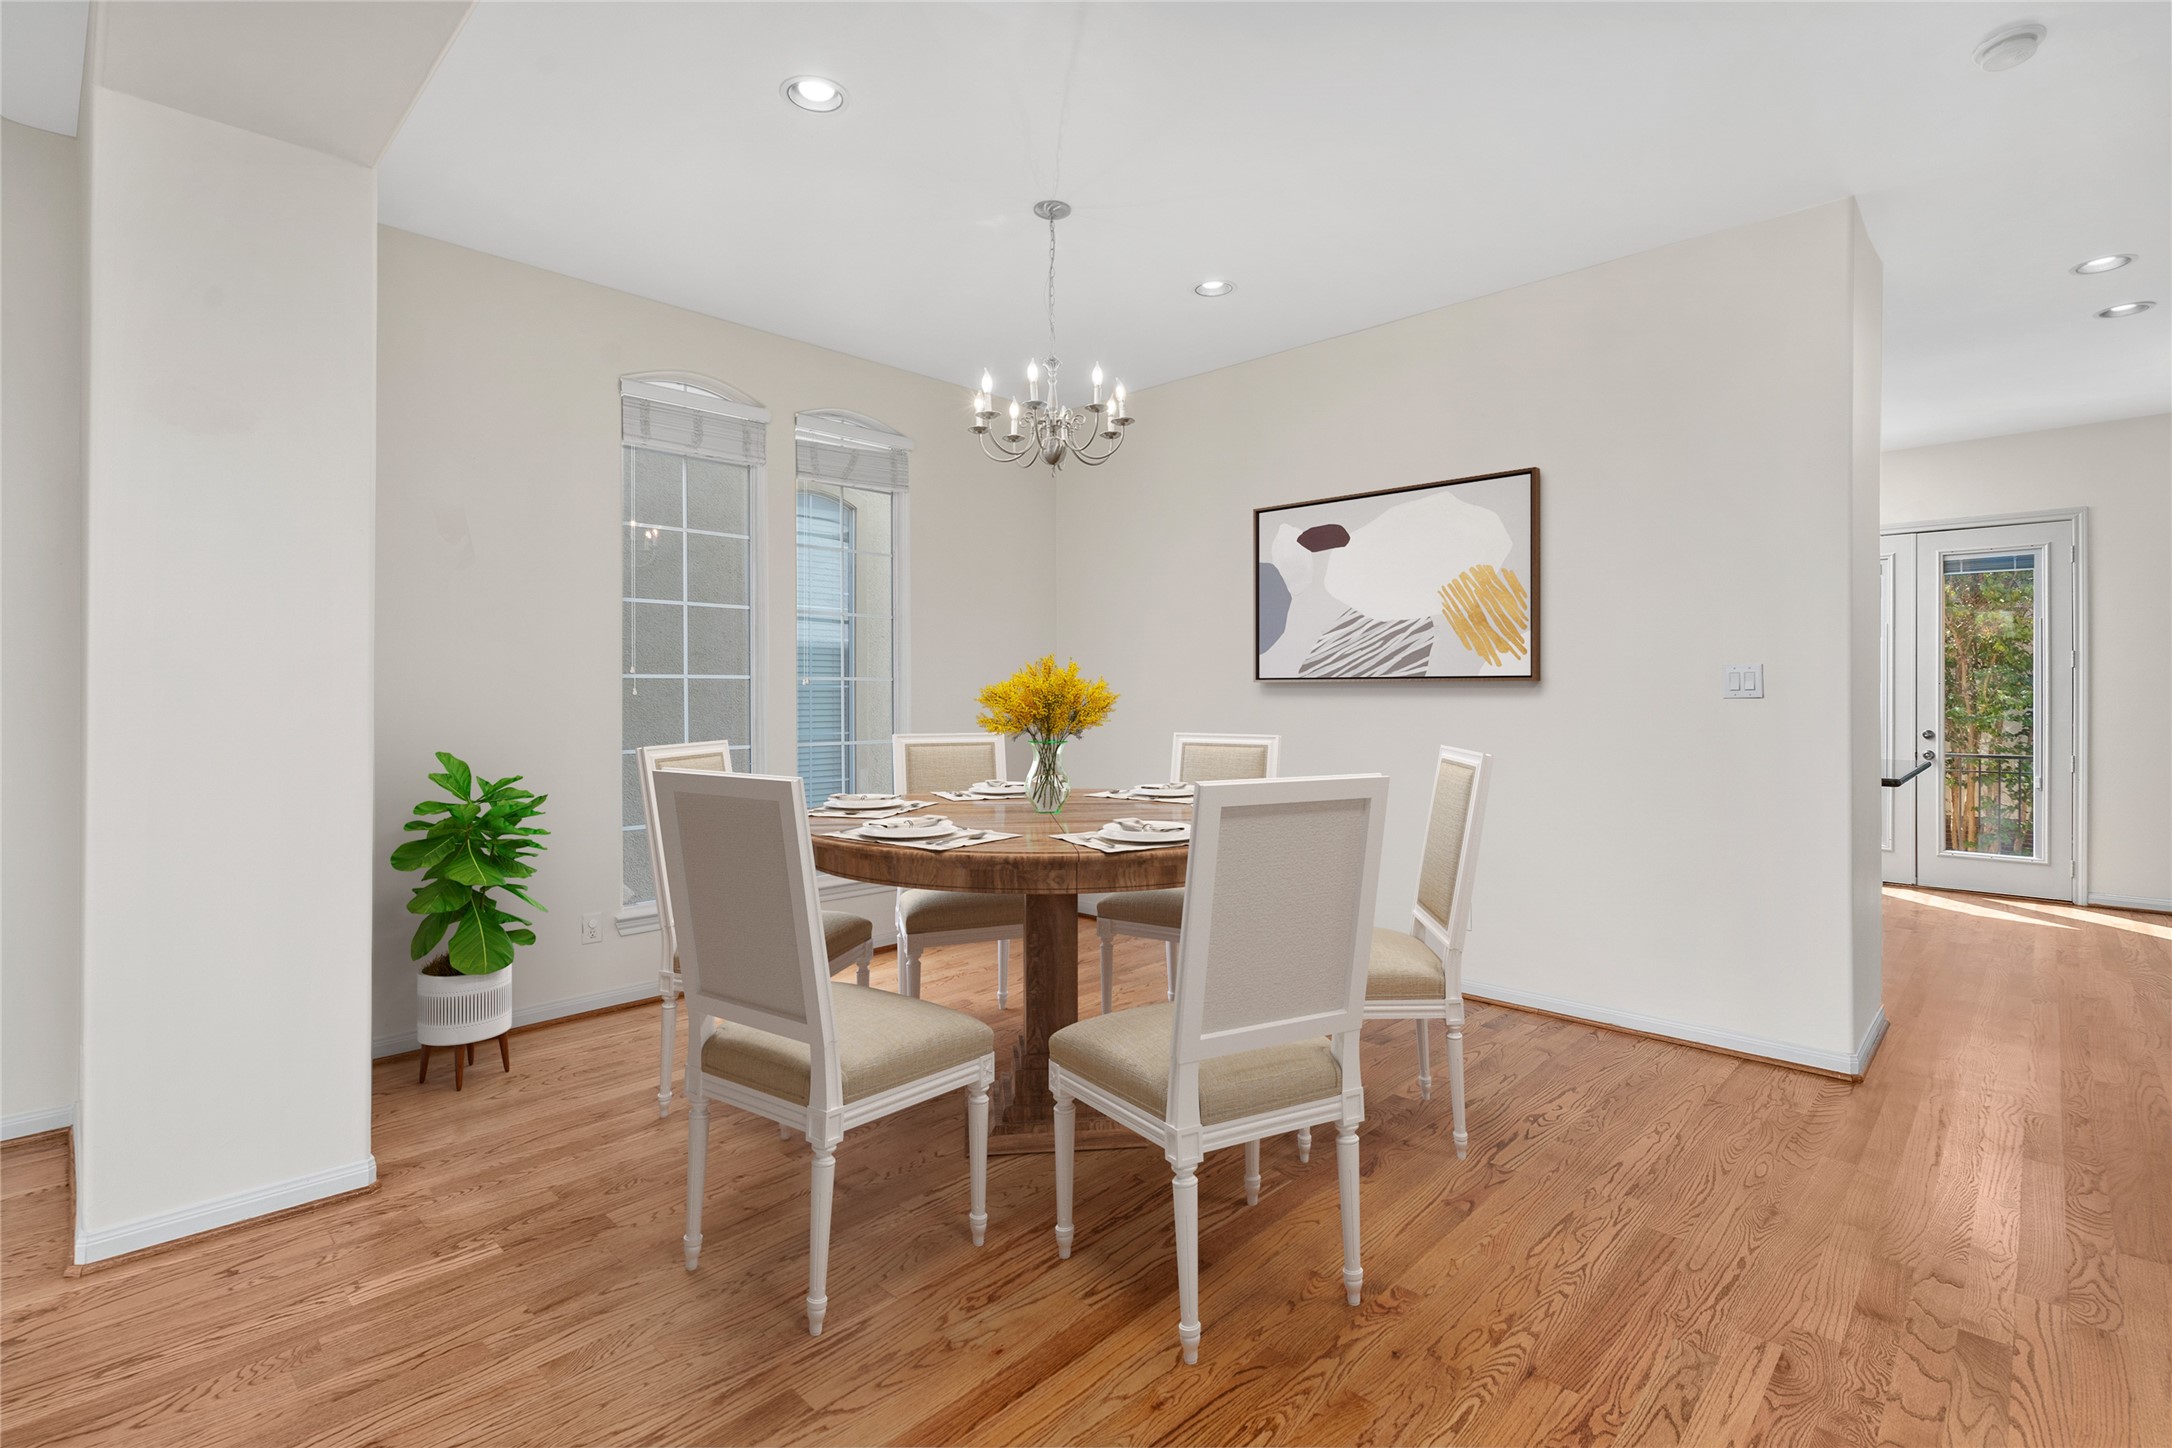 This dining room is great for any kind of entertaining. *Virtual staging has been added*